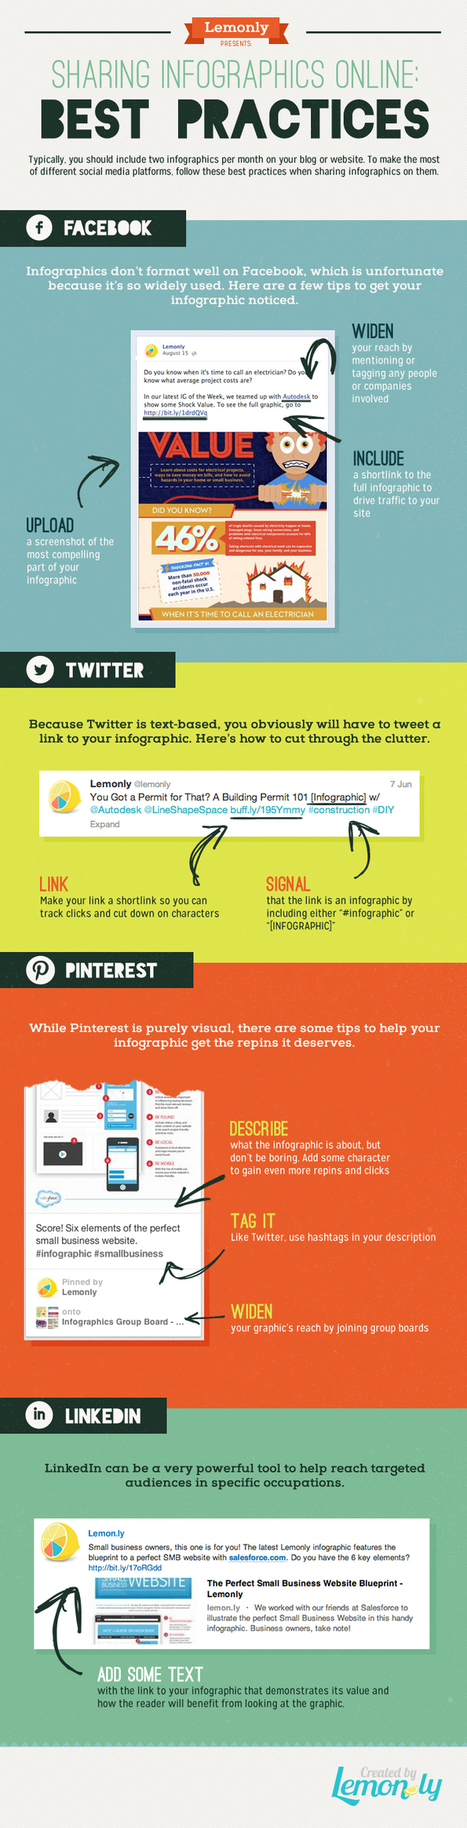 How to Share Infographics on Social Media - Best Practices [Infographic] | e-Social + AI DL IoT | Scoop.it